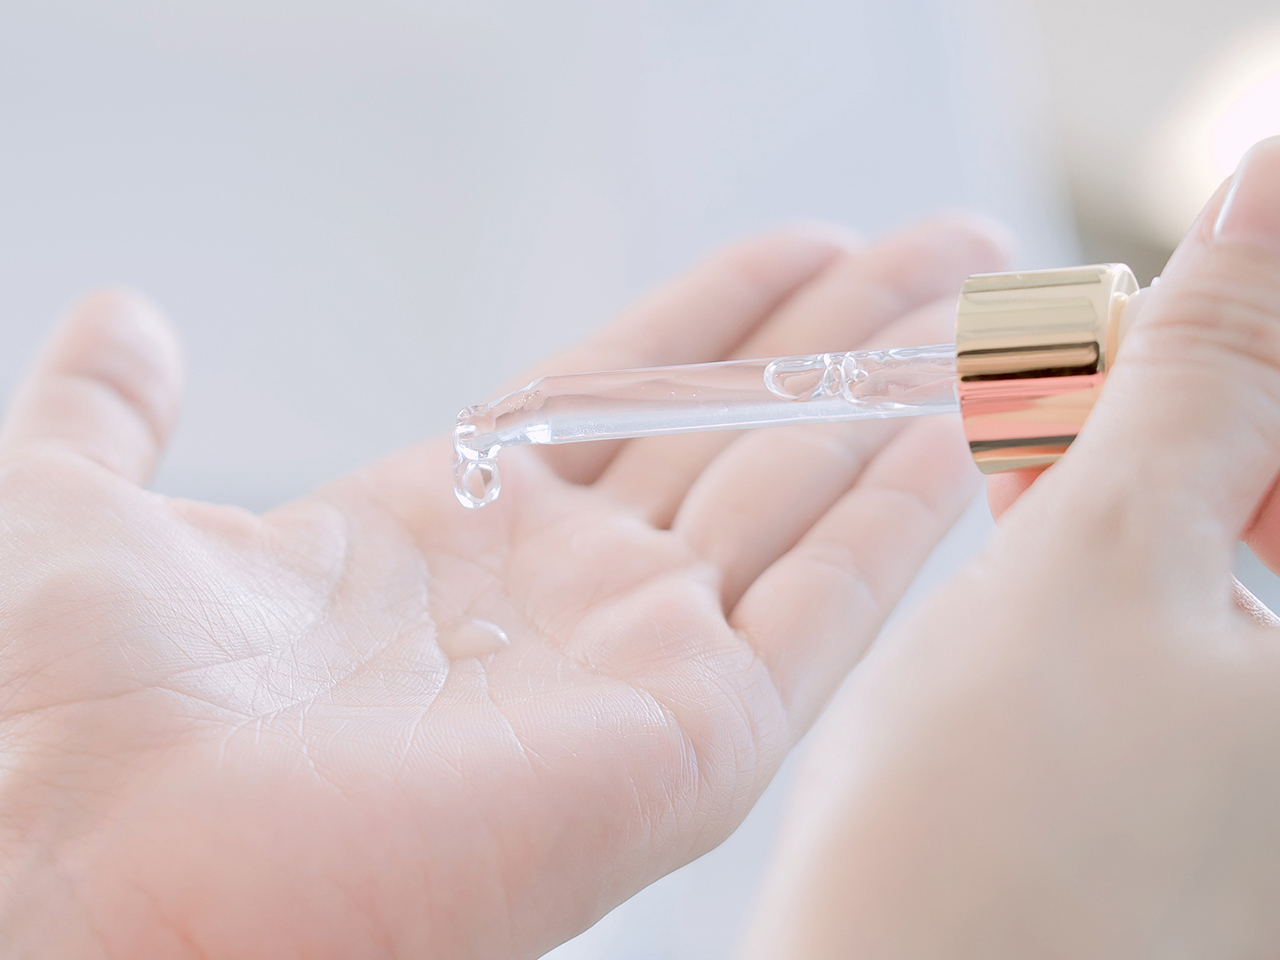 A woman using a pipette to drop serum into her palm for an article on exfoliating skincare acids like AHAs and BHAs, including glycolic, lactic and salicylic acids.